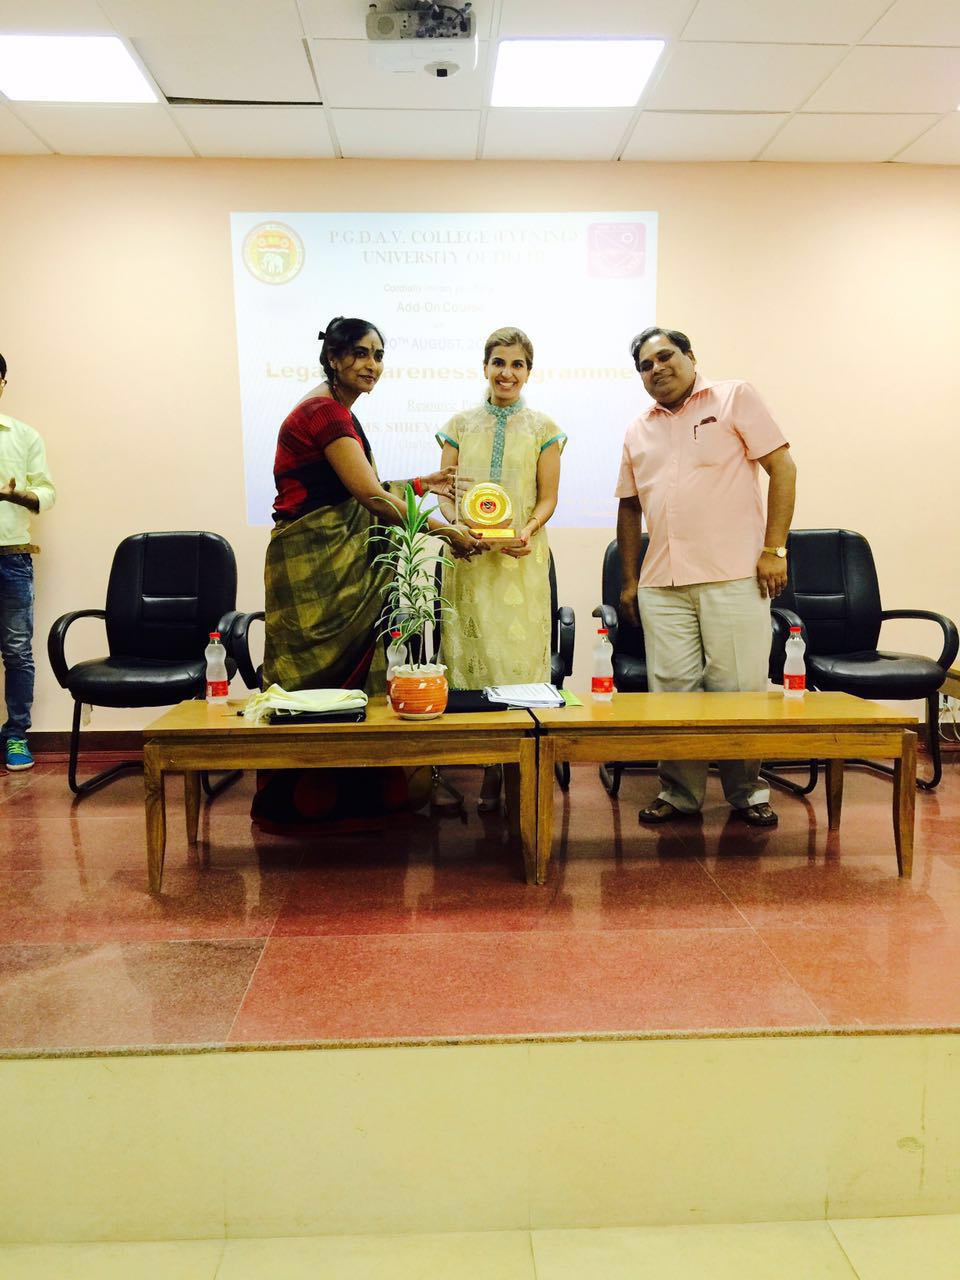 AS A PART OF CERTIFICATE COURSE DLSA, SOUTH-EAST ORGANISED A SESSION AT PGDAV COLLEGE ON 20.08.2016 CONDUCTED BY MS. SHREYA ARORA, SECRETARY, DLSA (SOUTH)